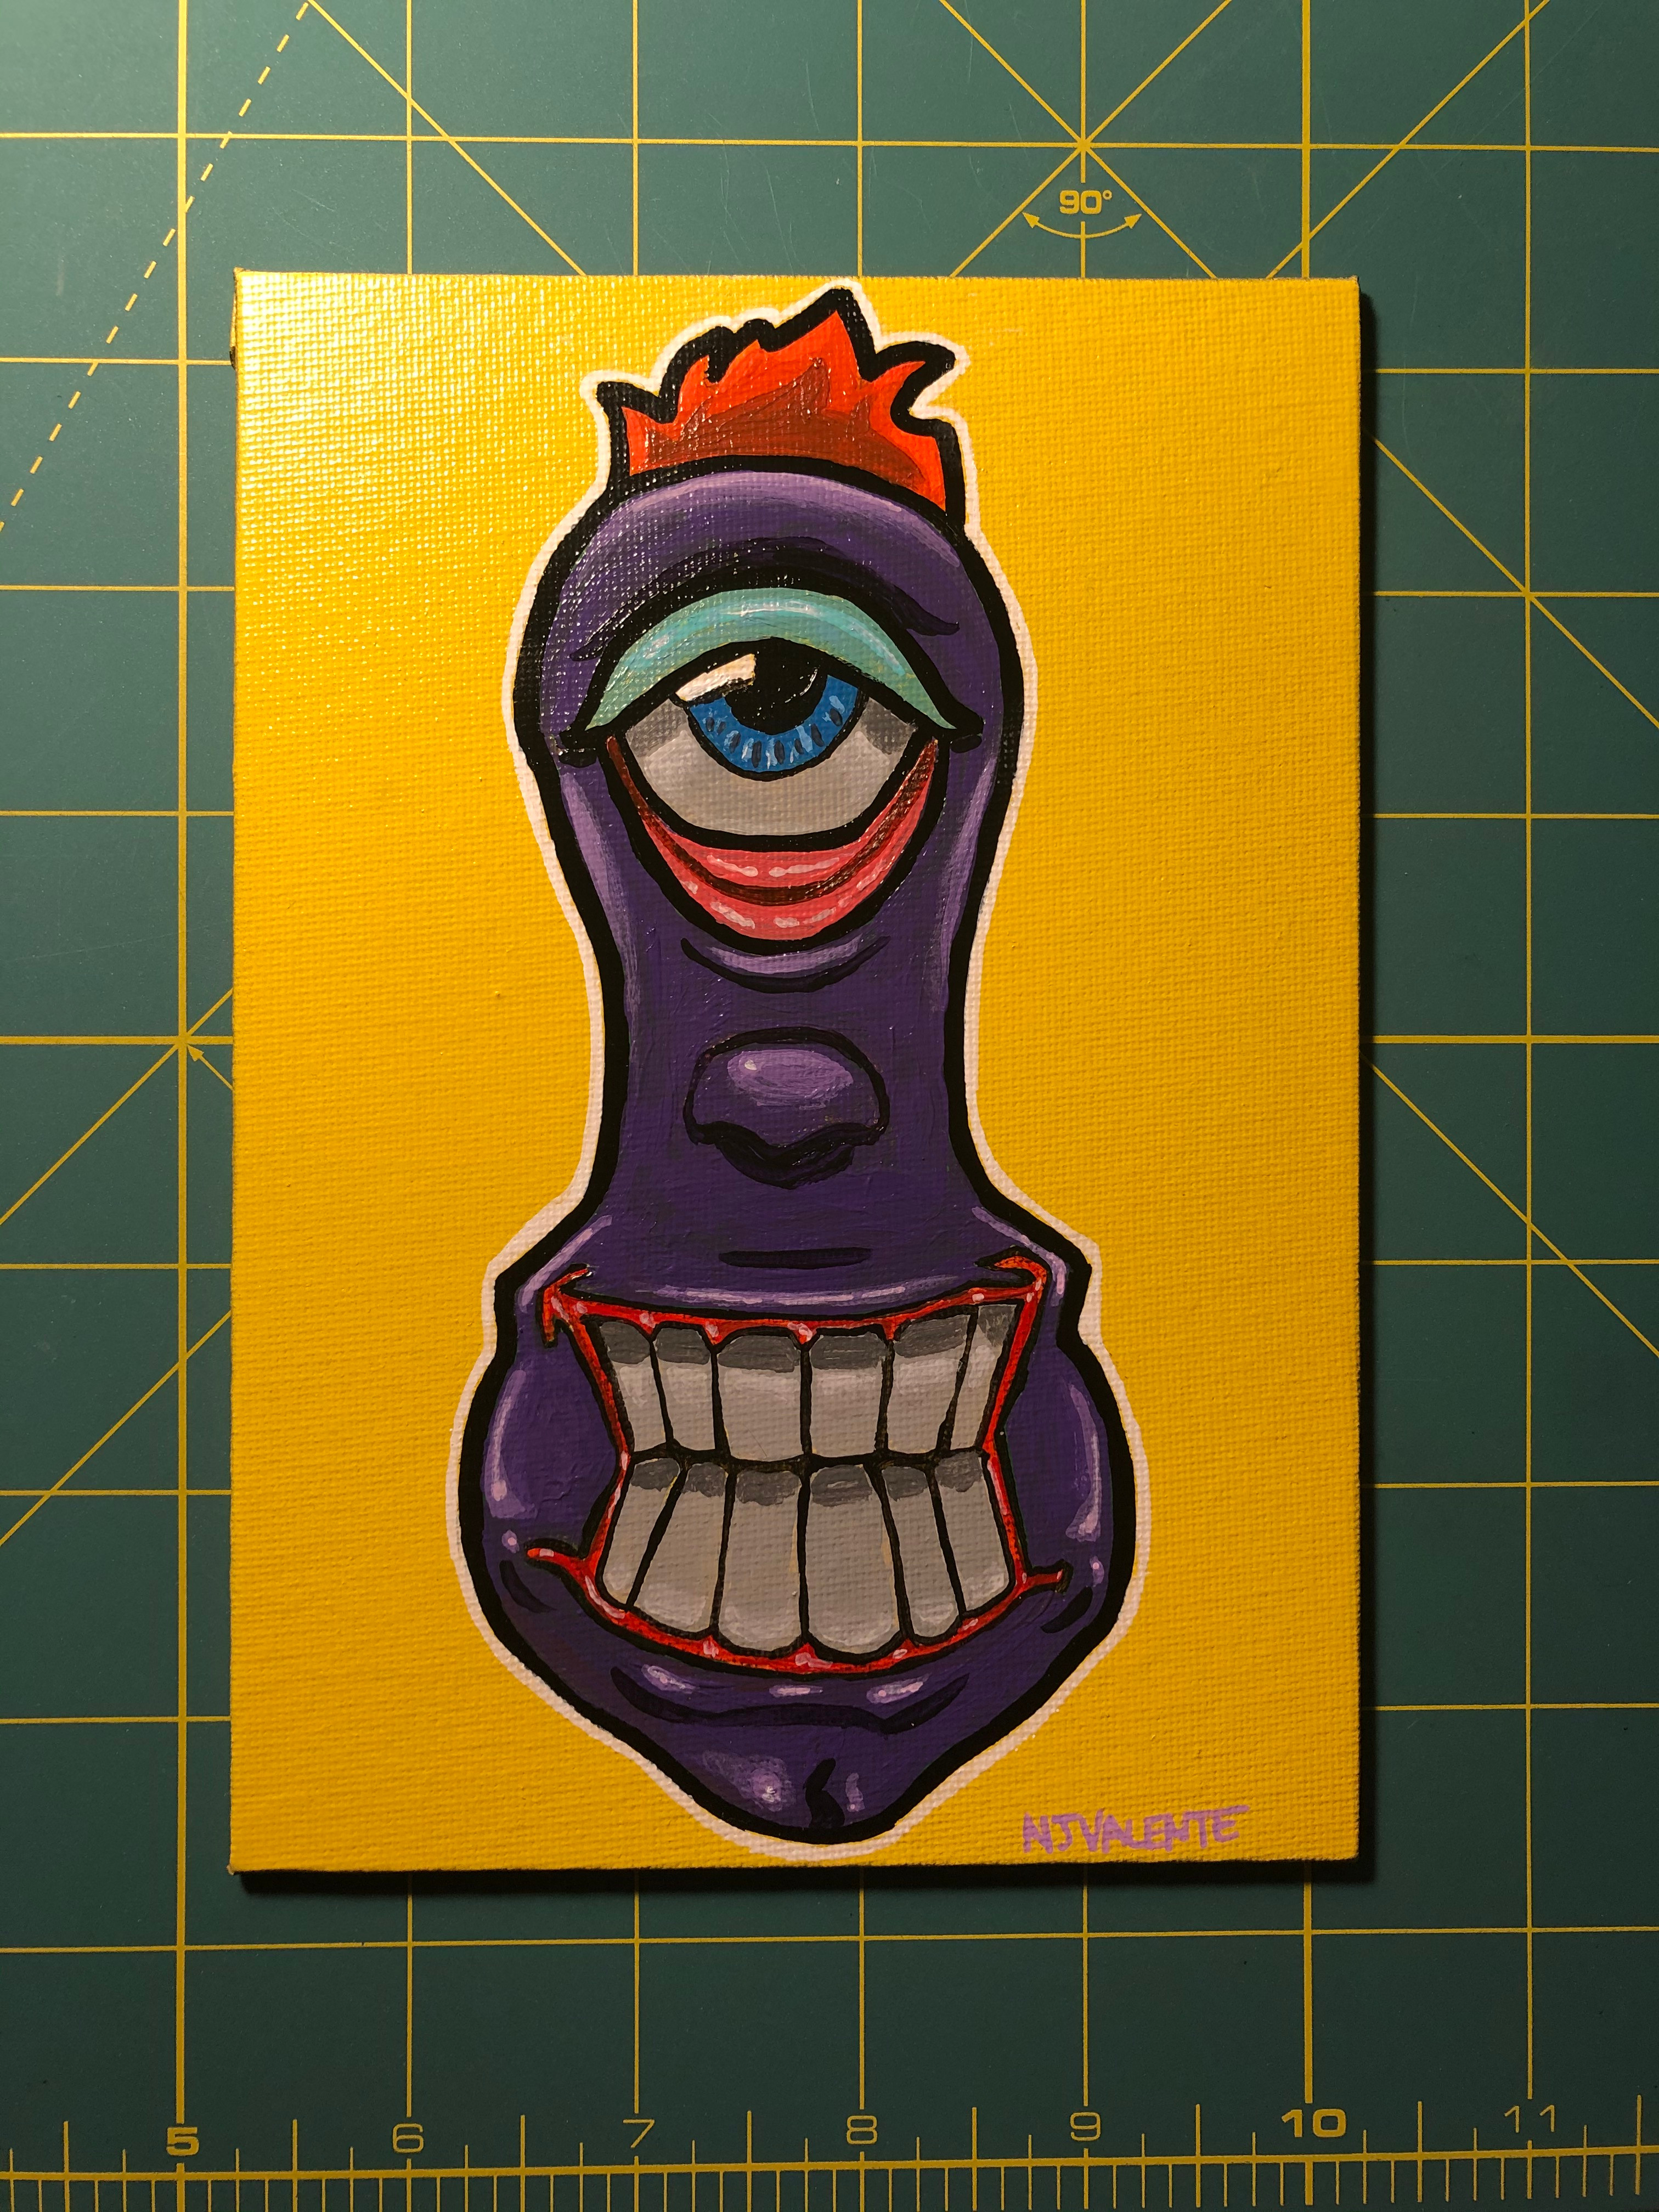 Purple Funky Face Eyeball painting, spray painted background. Character art don in acrylic paint.